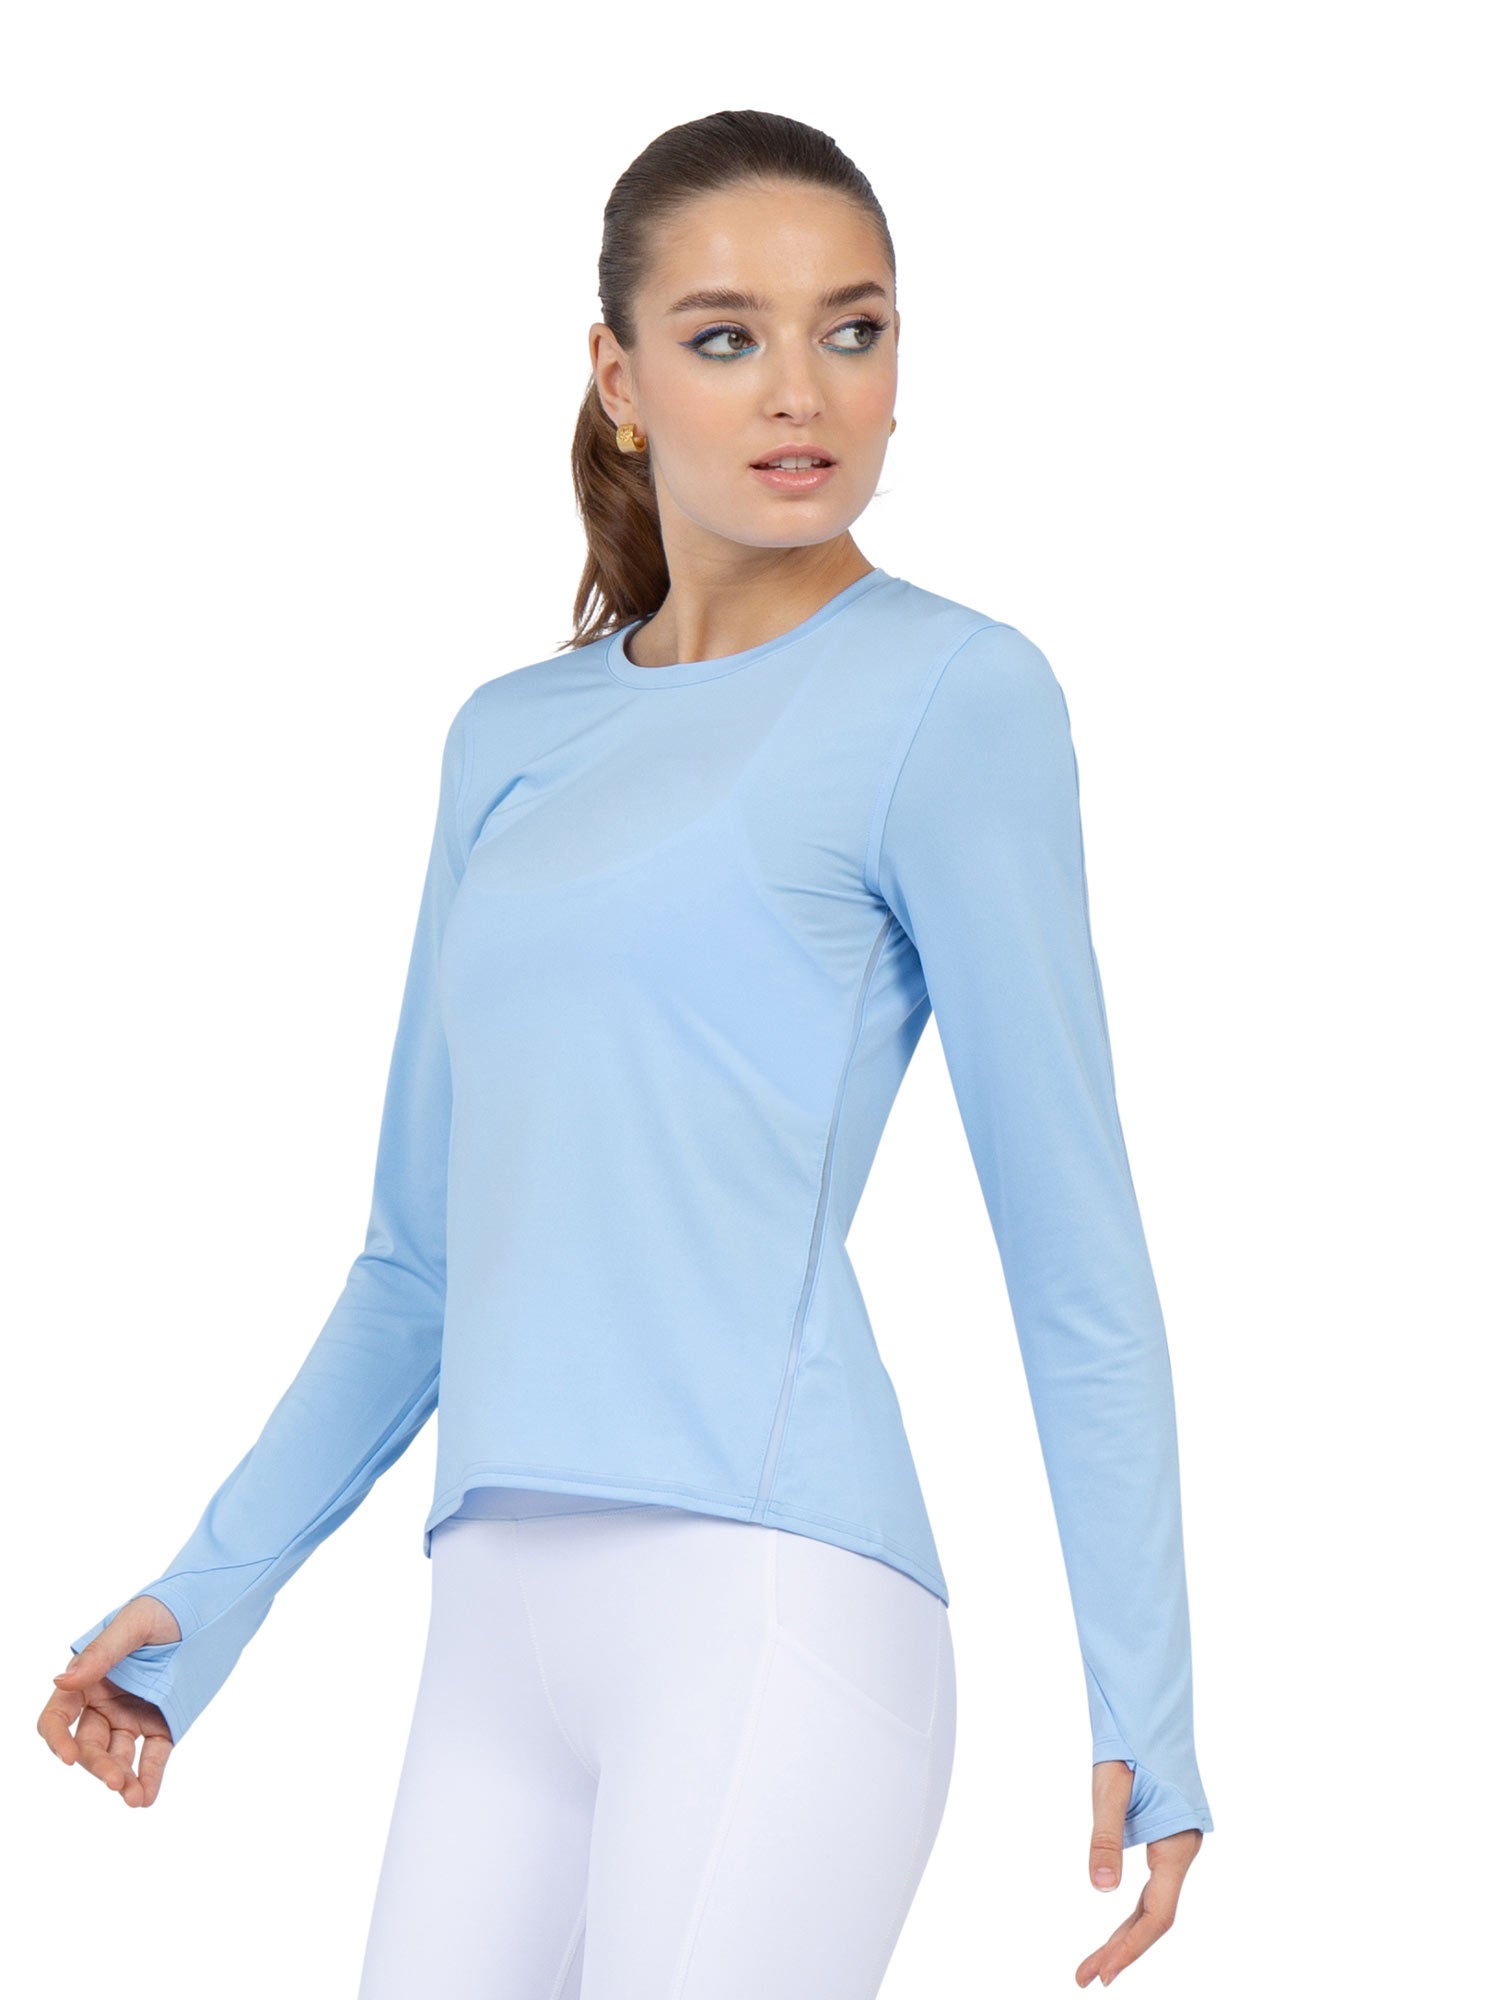 Front view of model wearing the Classic long sleeve crew neck in bluebell by inPhorm NYC with her hands at her side